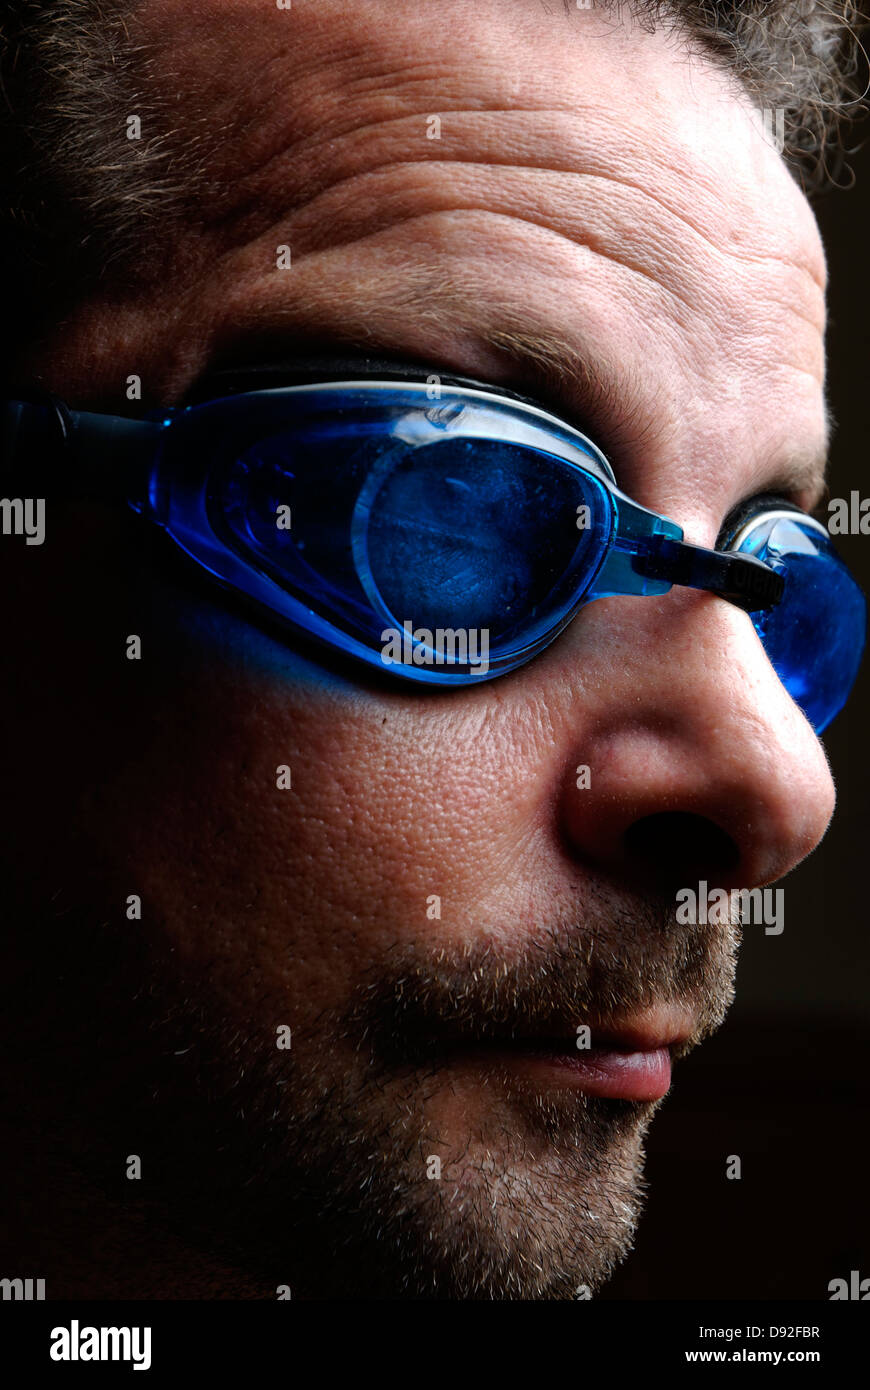 A man with blue swimming goggles Stock Photo